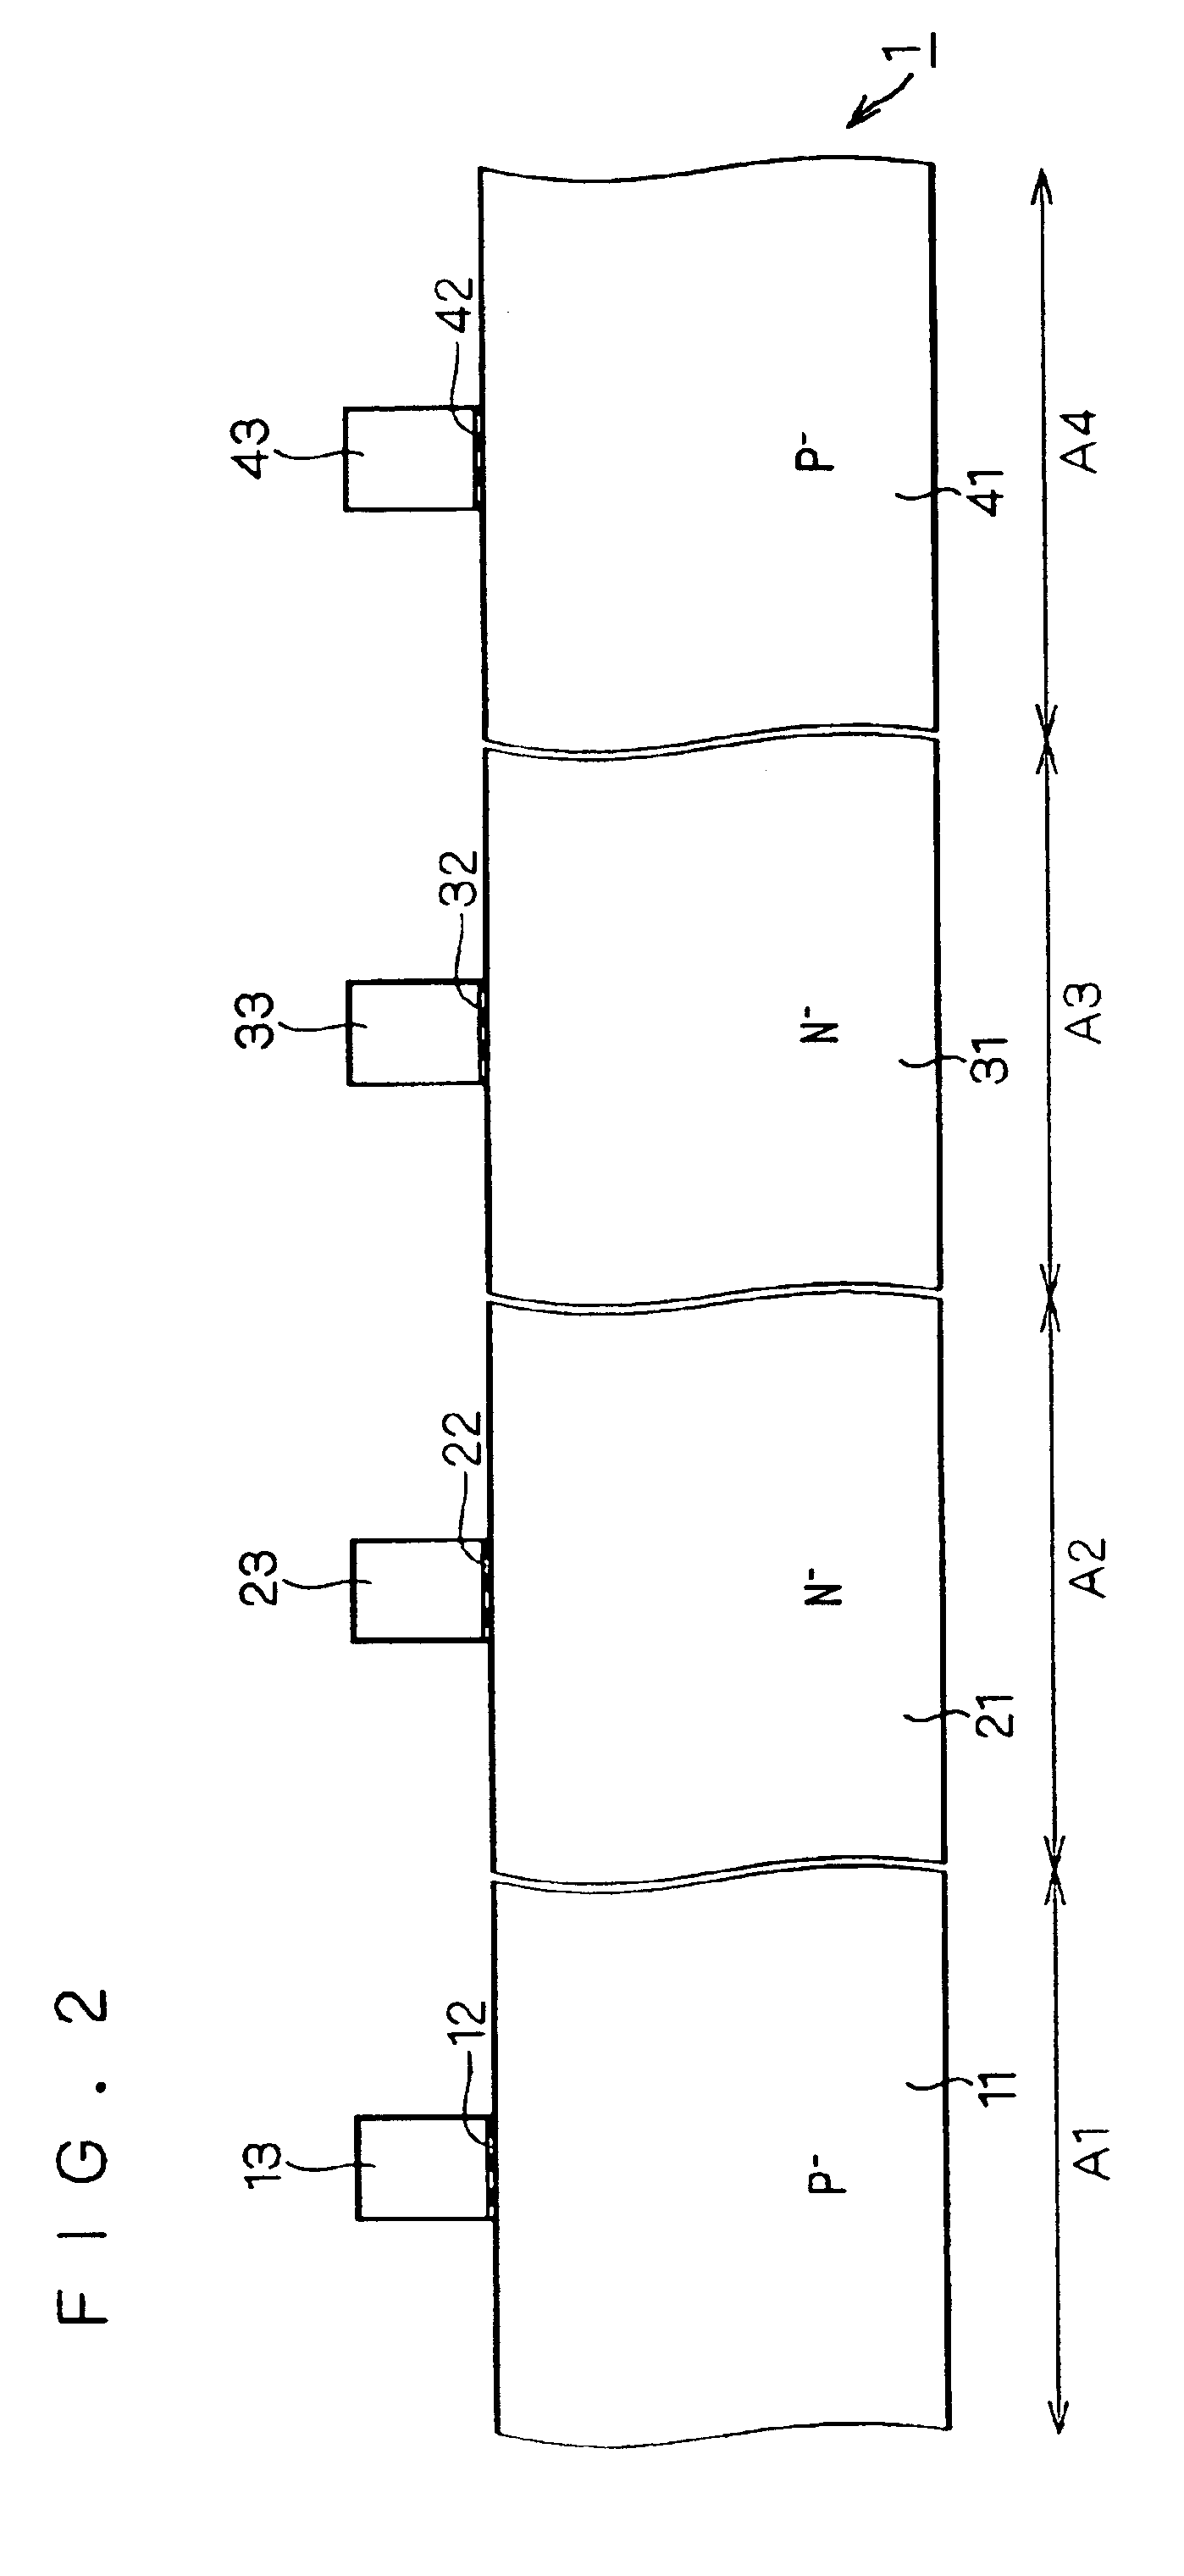 Semiconductor device including a capacitance